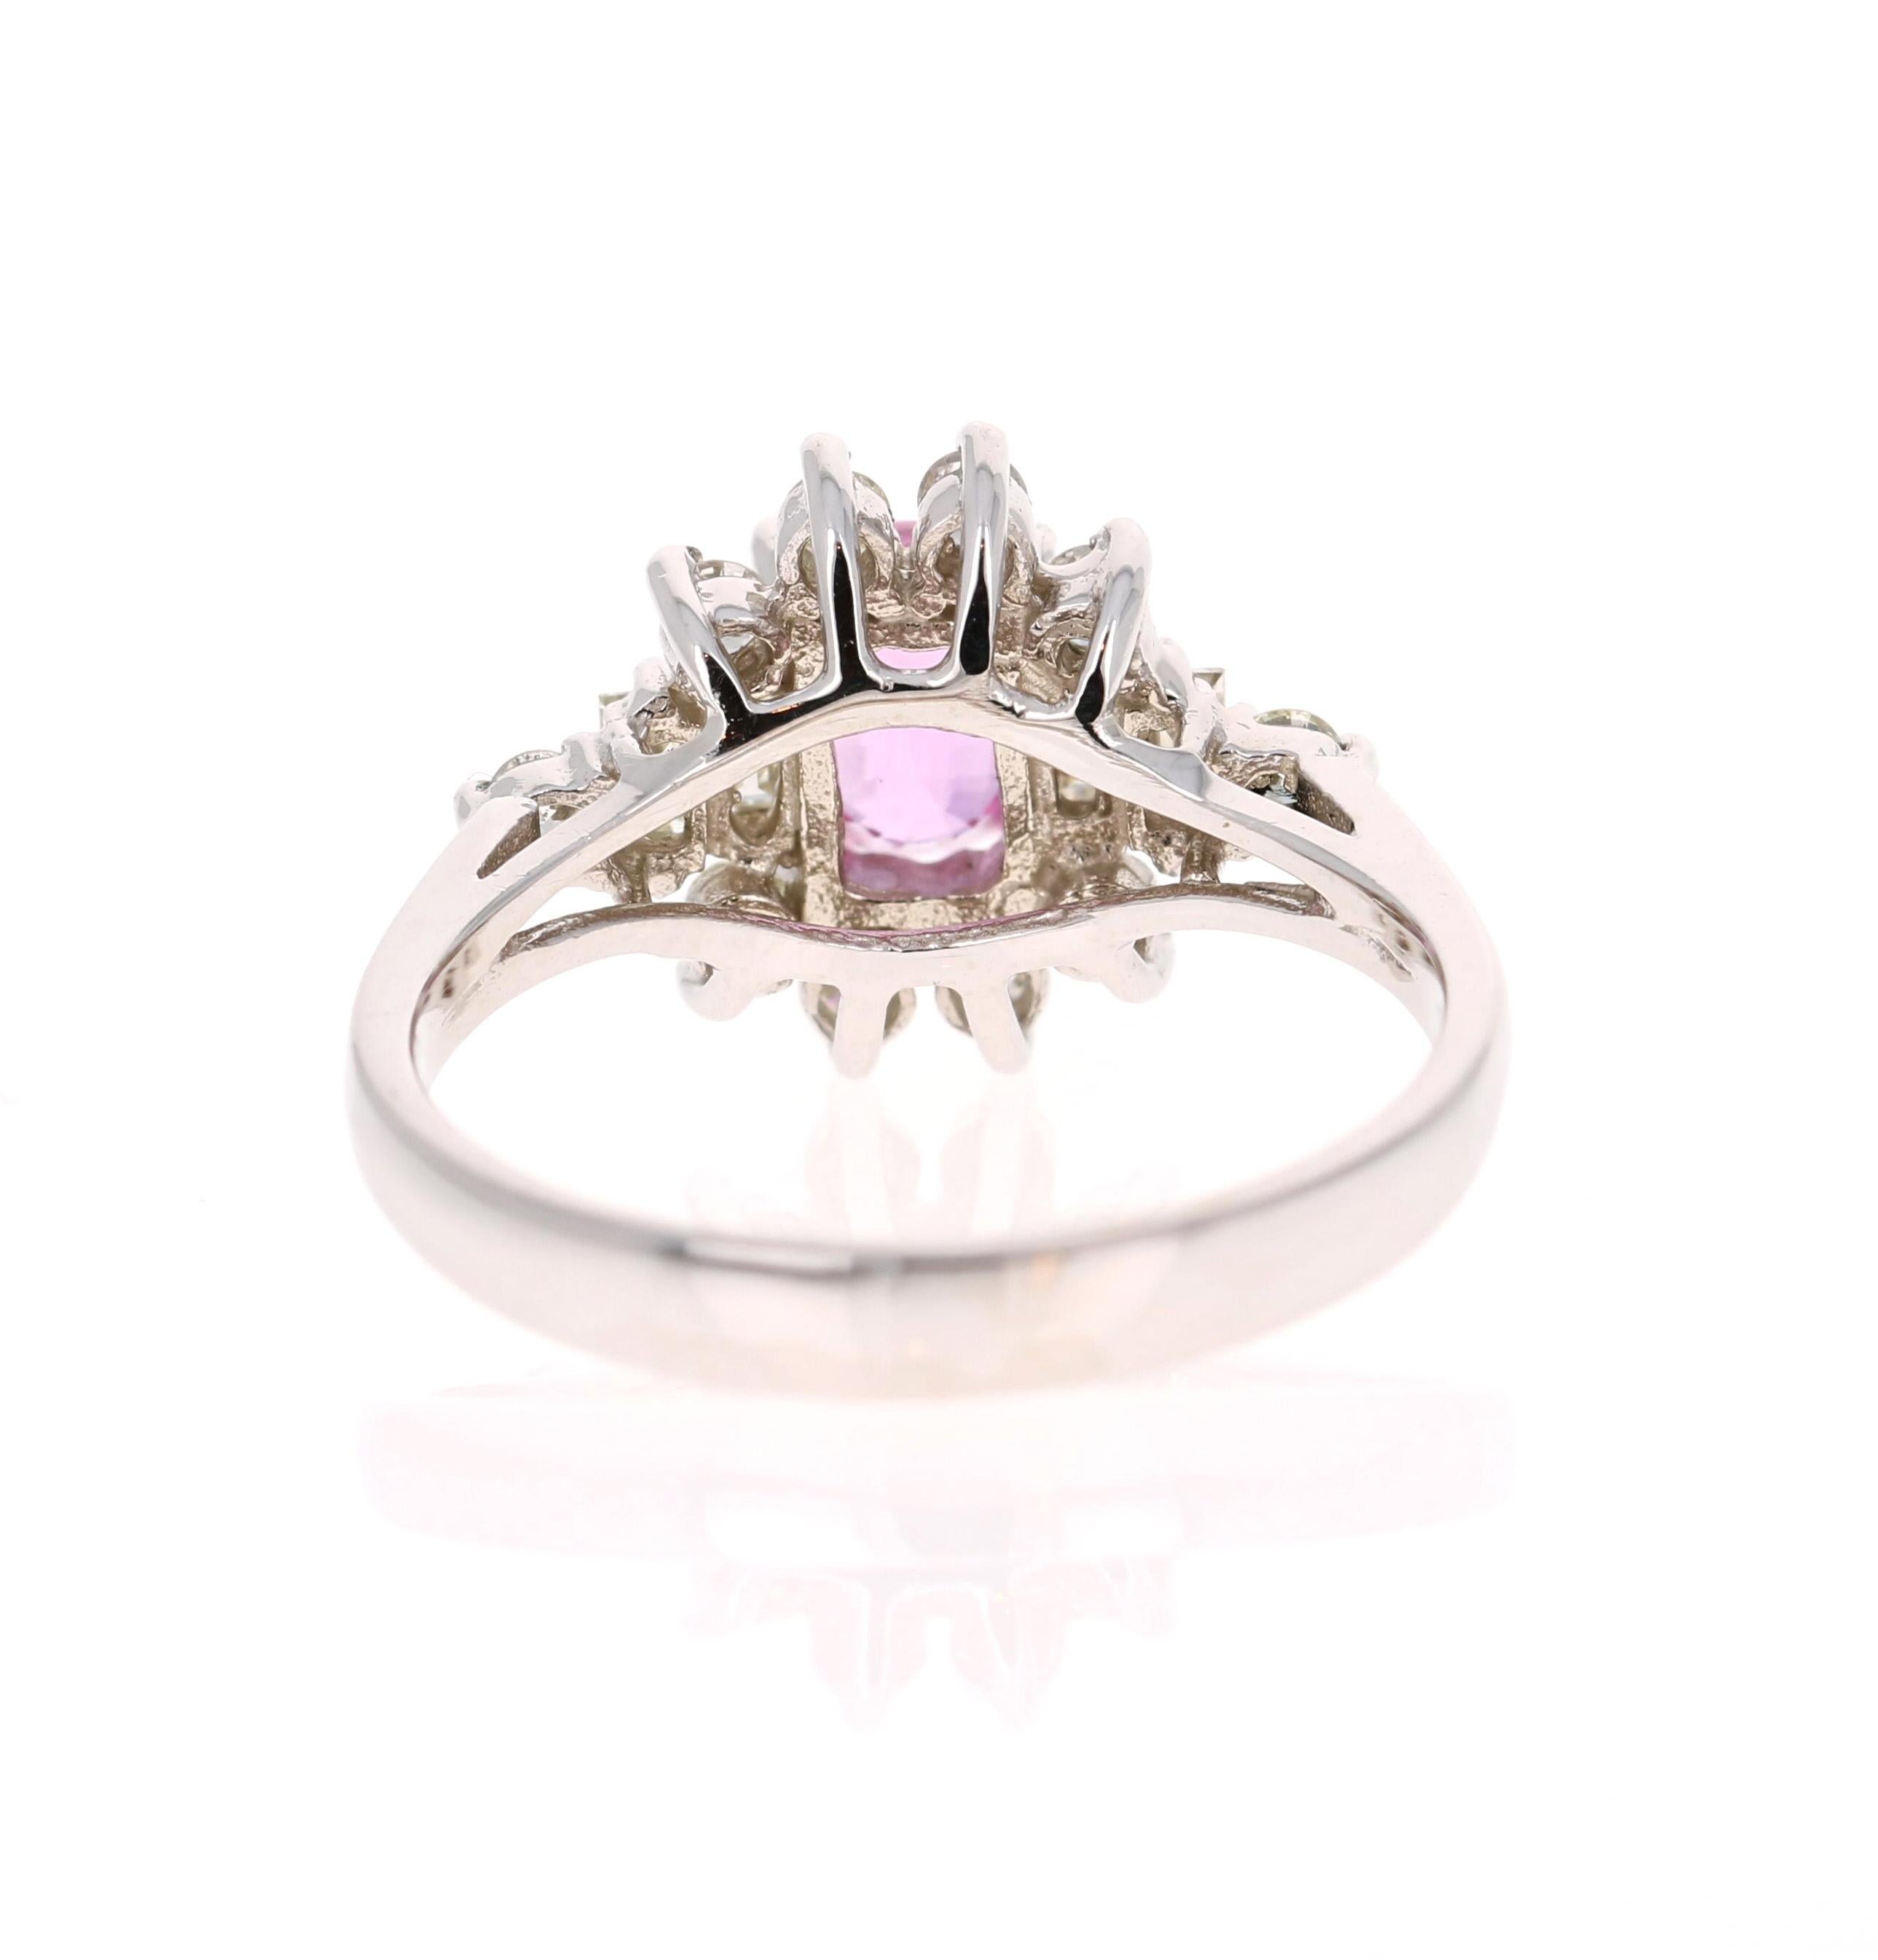 Oval Cut 1.66 Carat Pink Sapphire Diamond White Gold Engagement Ring For Sale